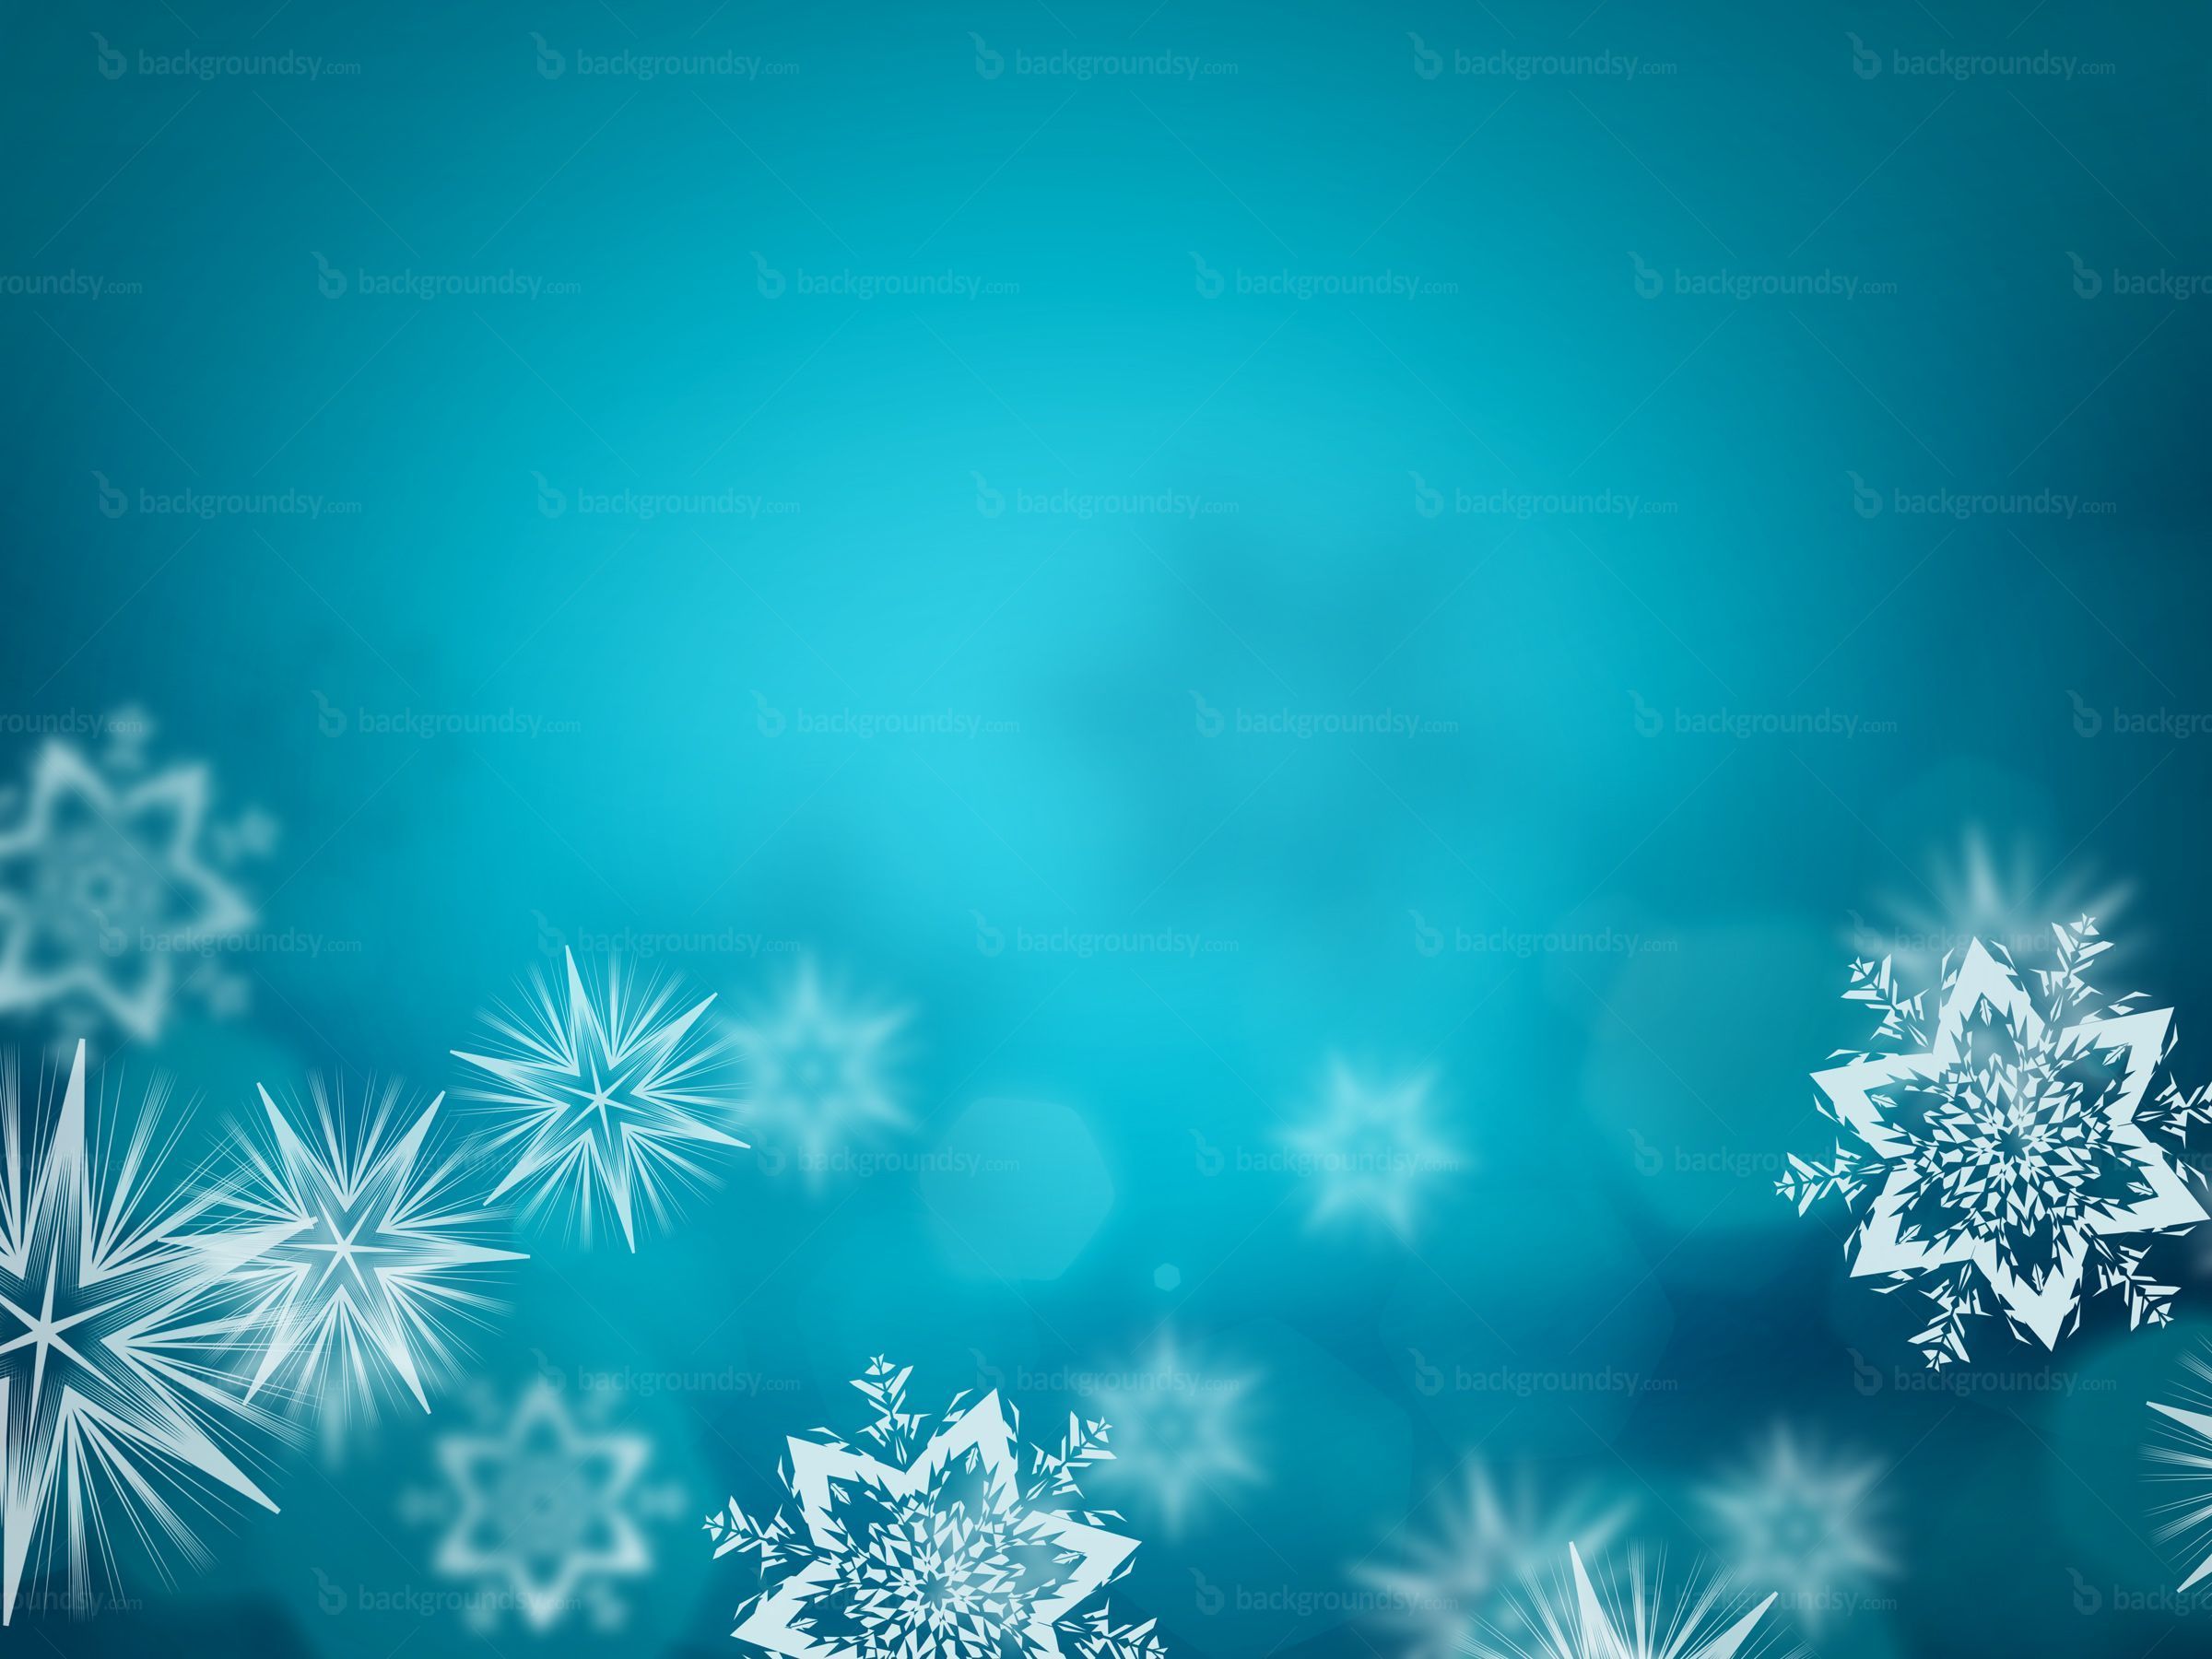 Abstract winter background | Backgroundsy.com